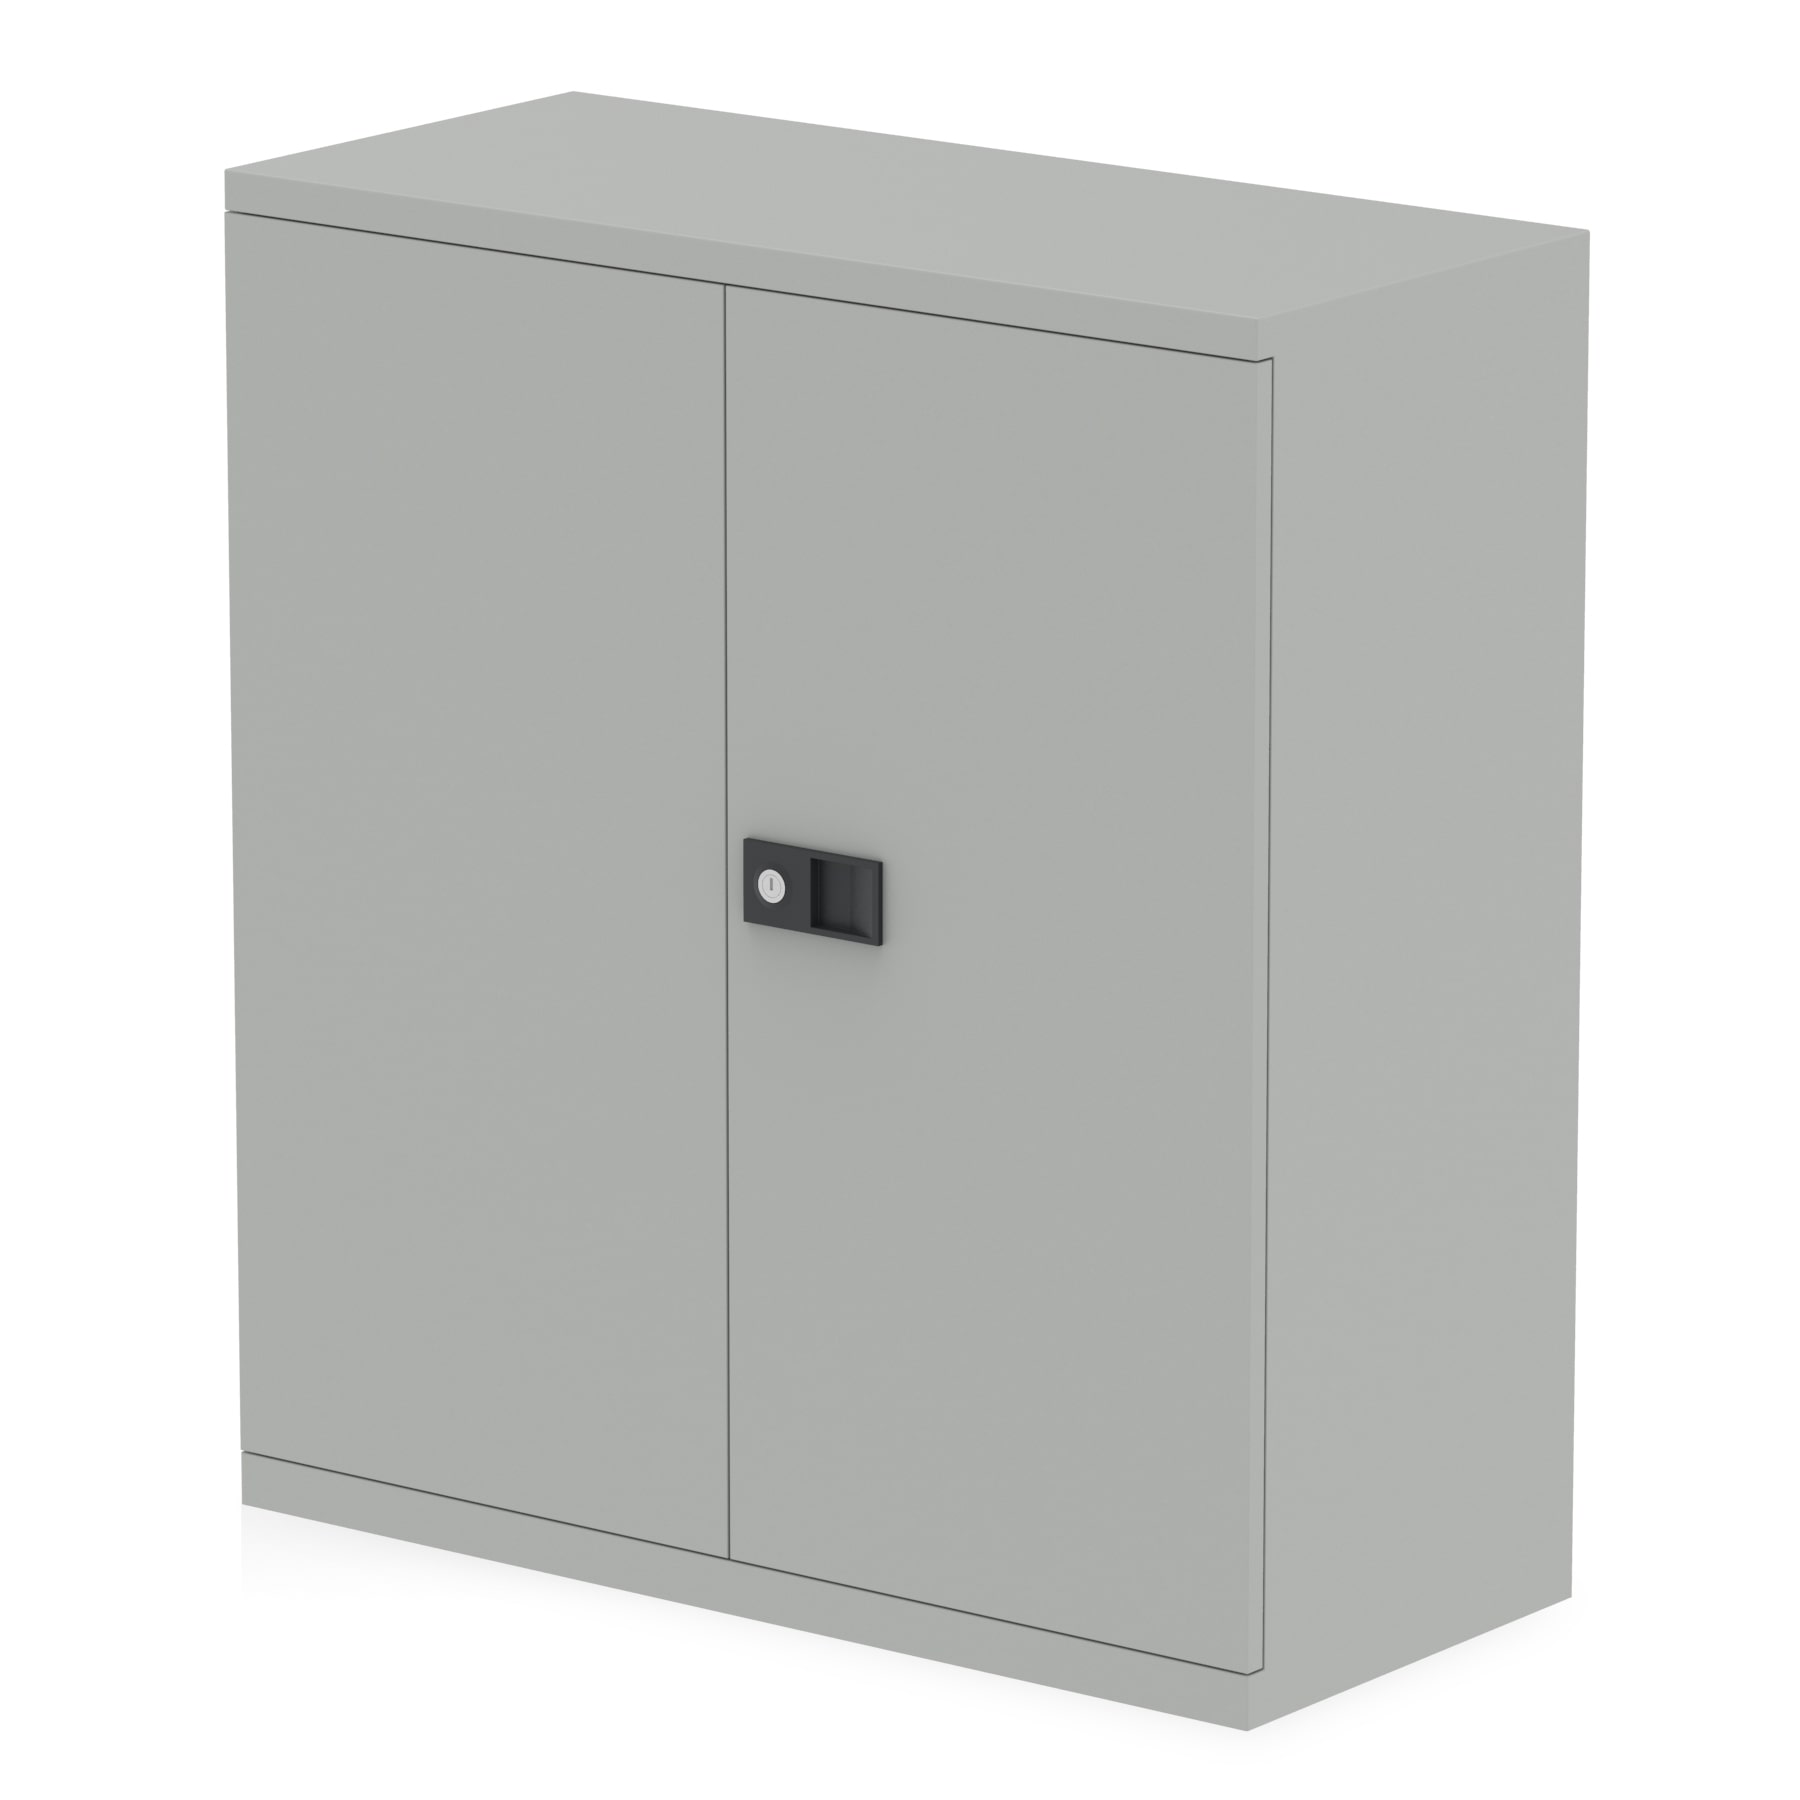 Bisley Qube Steel Stationery Cupboard - Lockable, Adjustable Shelves, 5-Year Guarantee, 2 Sizes (W914 x D400 x H1000/1806mm)